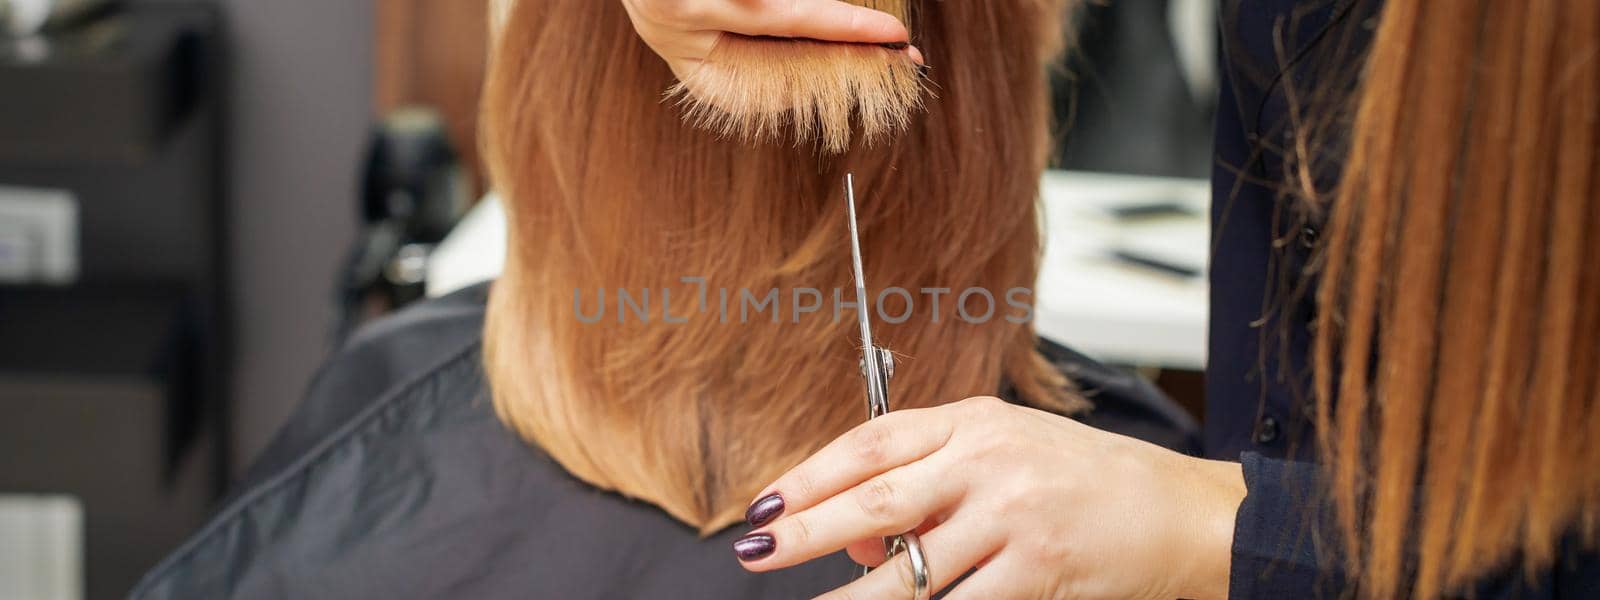 Hairdresser cuts red hair tips holding lock of red hair between fingers in beauty salon. Getting rid of split ends